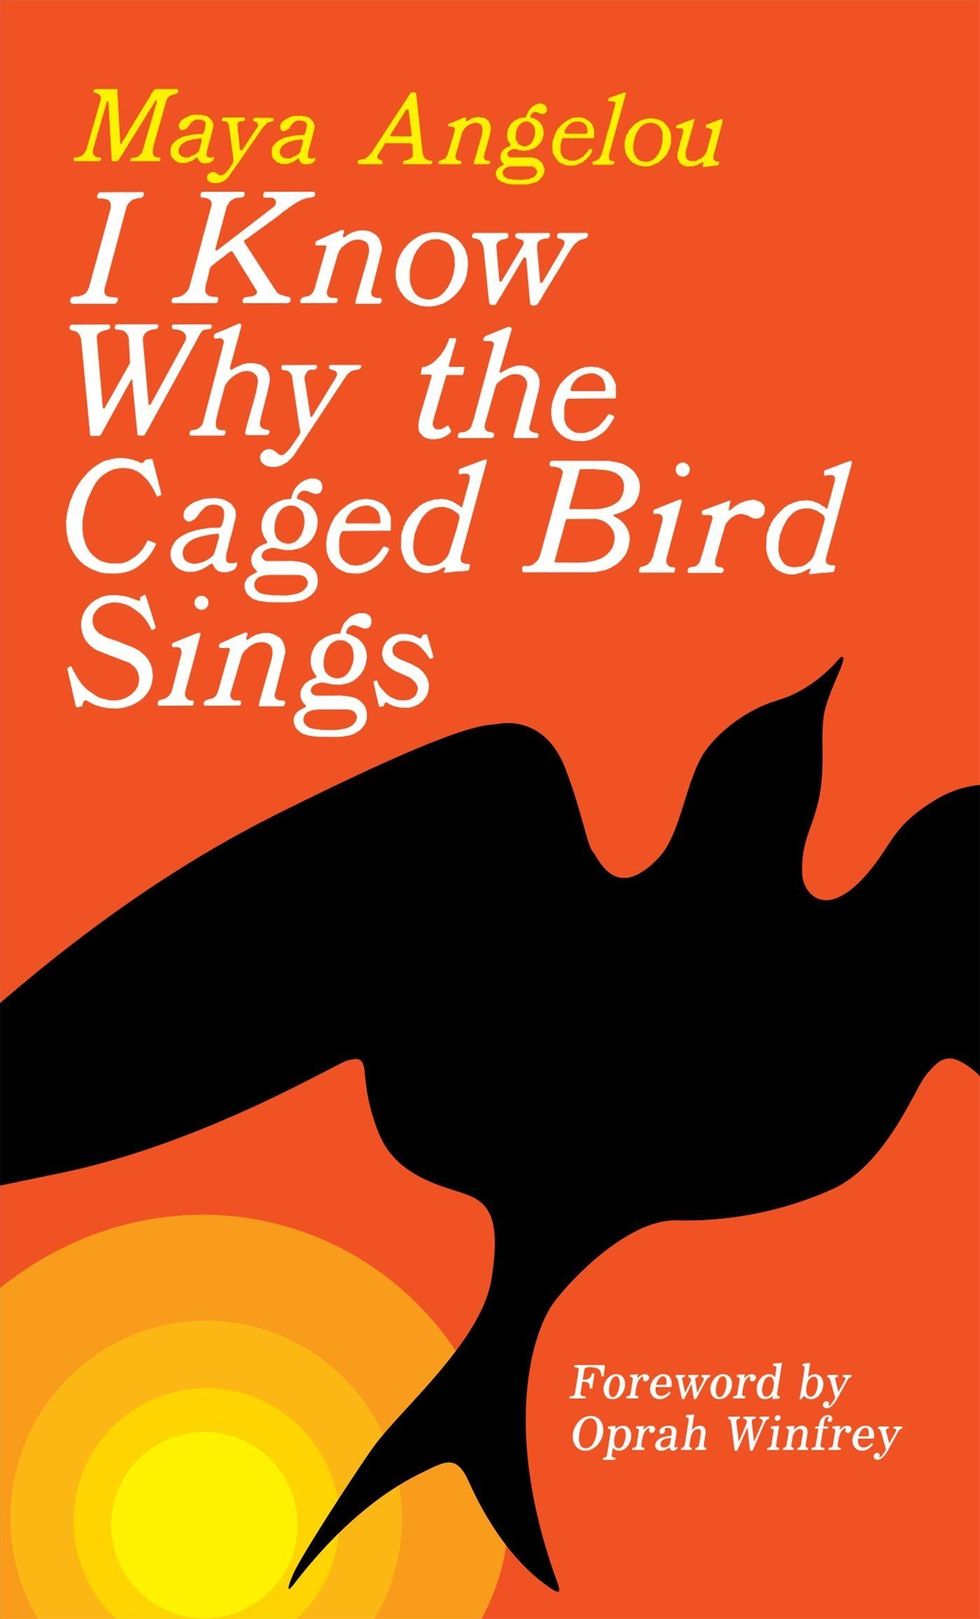 I Know Why the Caged Bird Sings by Maya Angelou (1969)